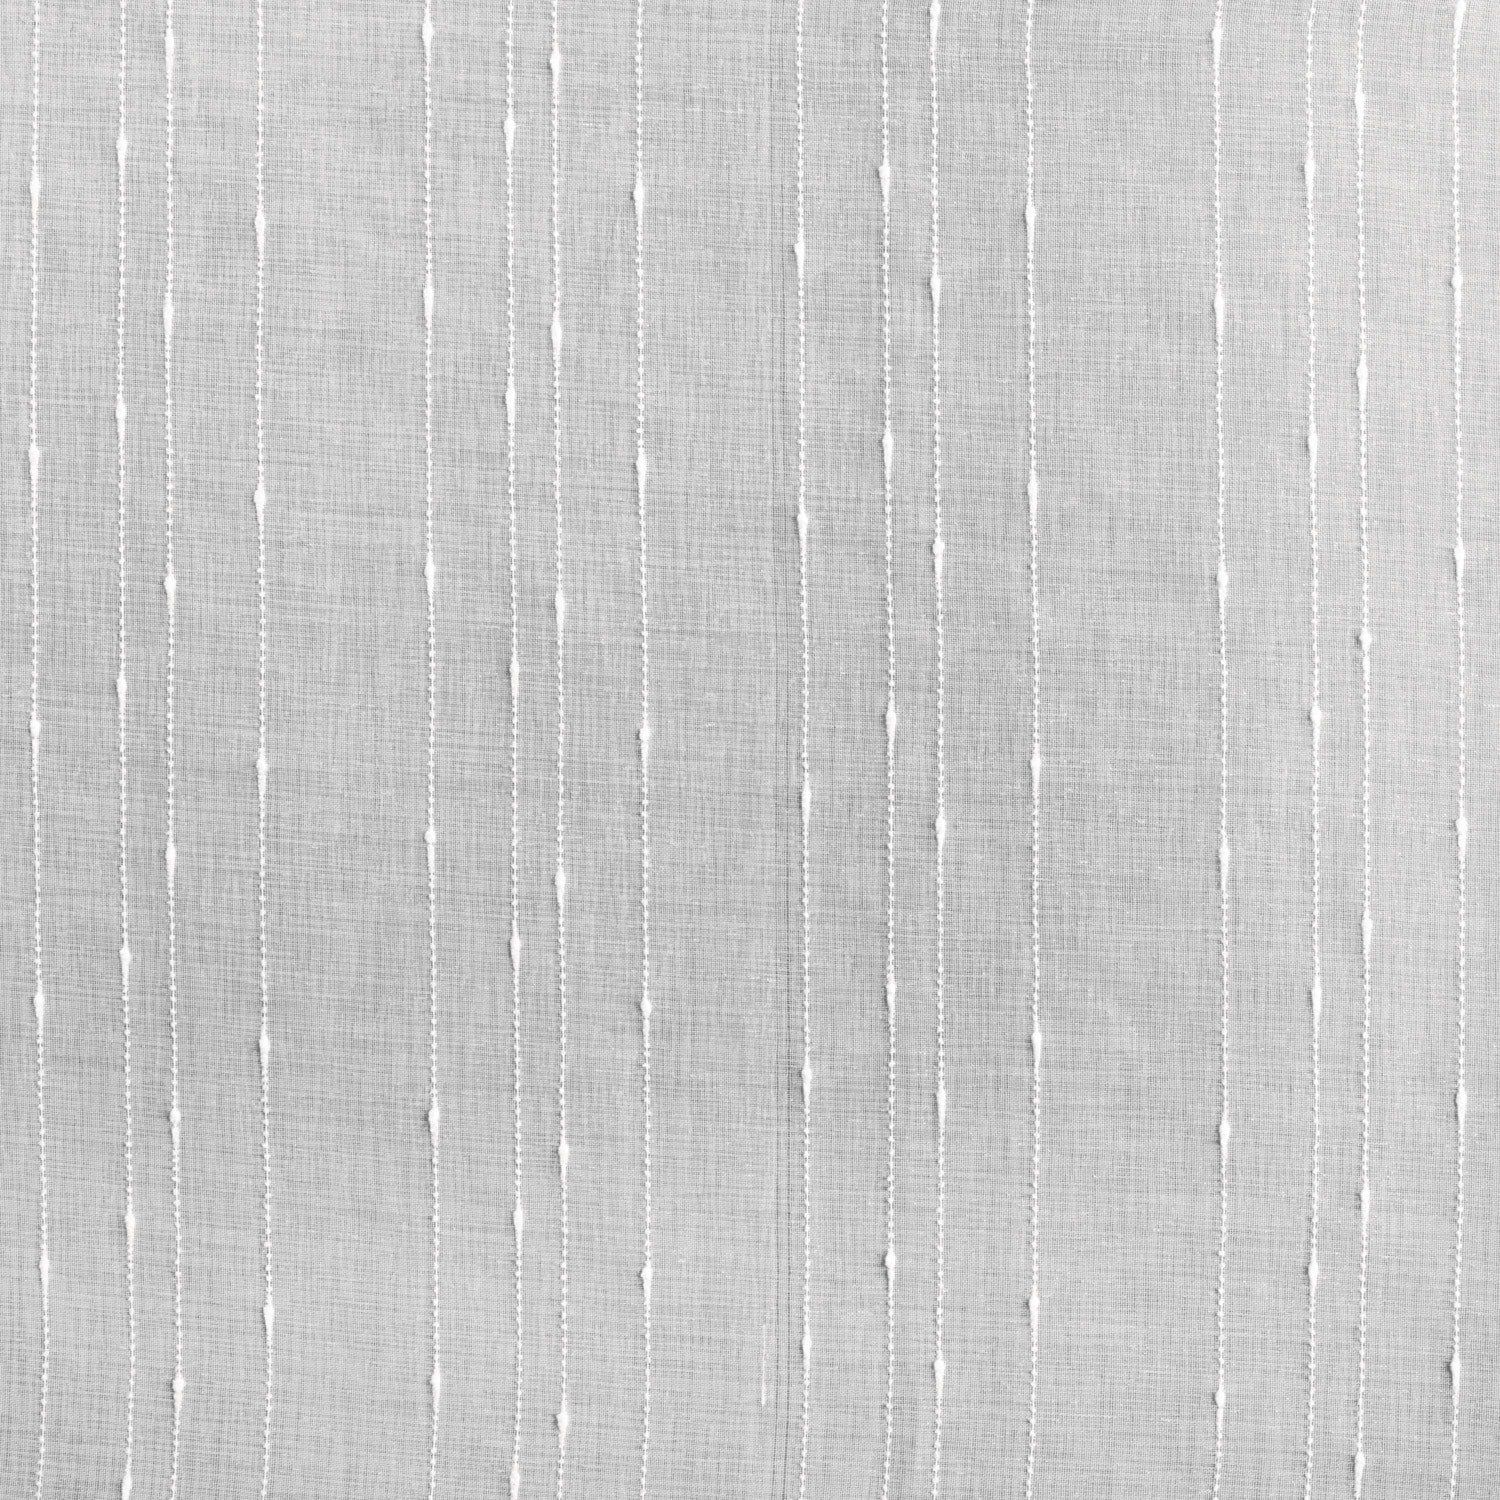 Exclusive Fabrics Montpellier Striped Linen Sheer Curtain In Montpellier Striped Linen Sheer Curtains (View 10 of 20)